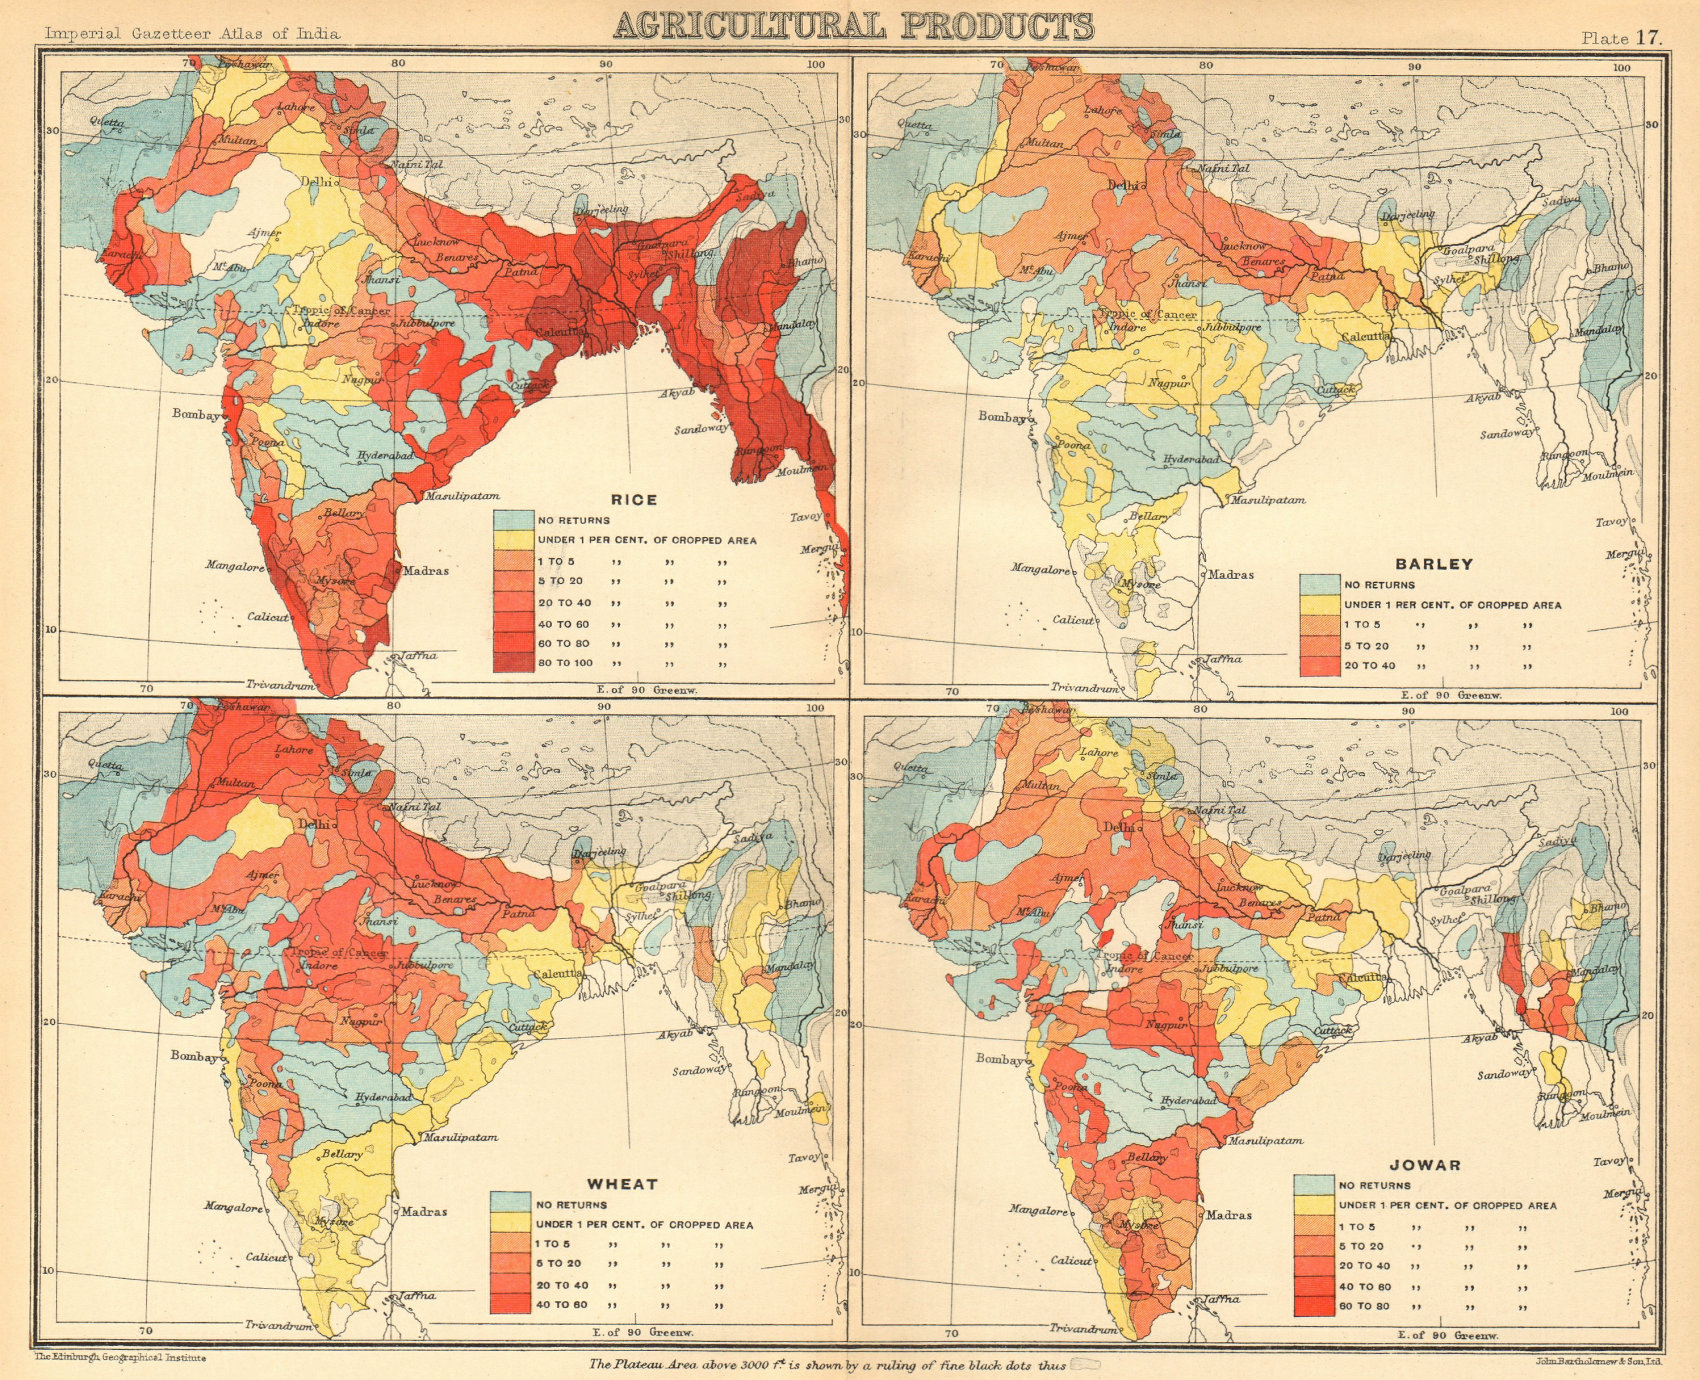 Associate Product BRITISH INDIA Food-grains Agriculture produce Wheat Rice Barley Jowar 1931 map